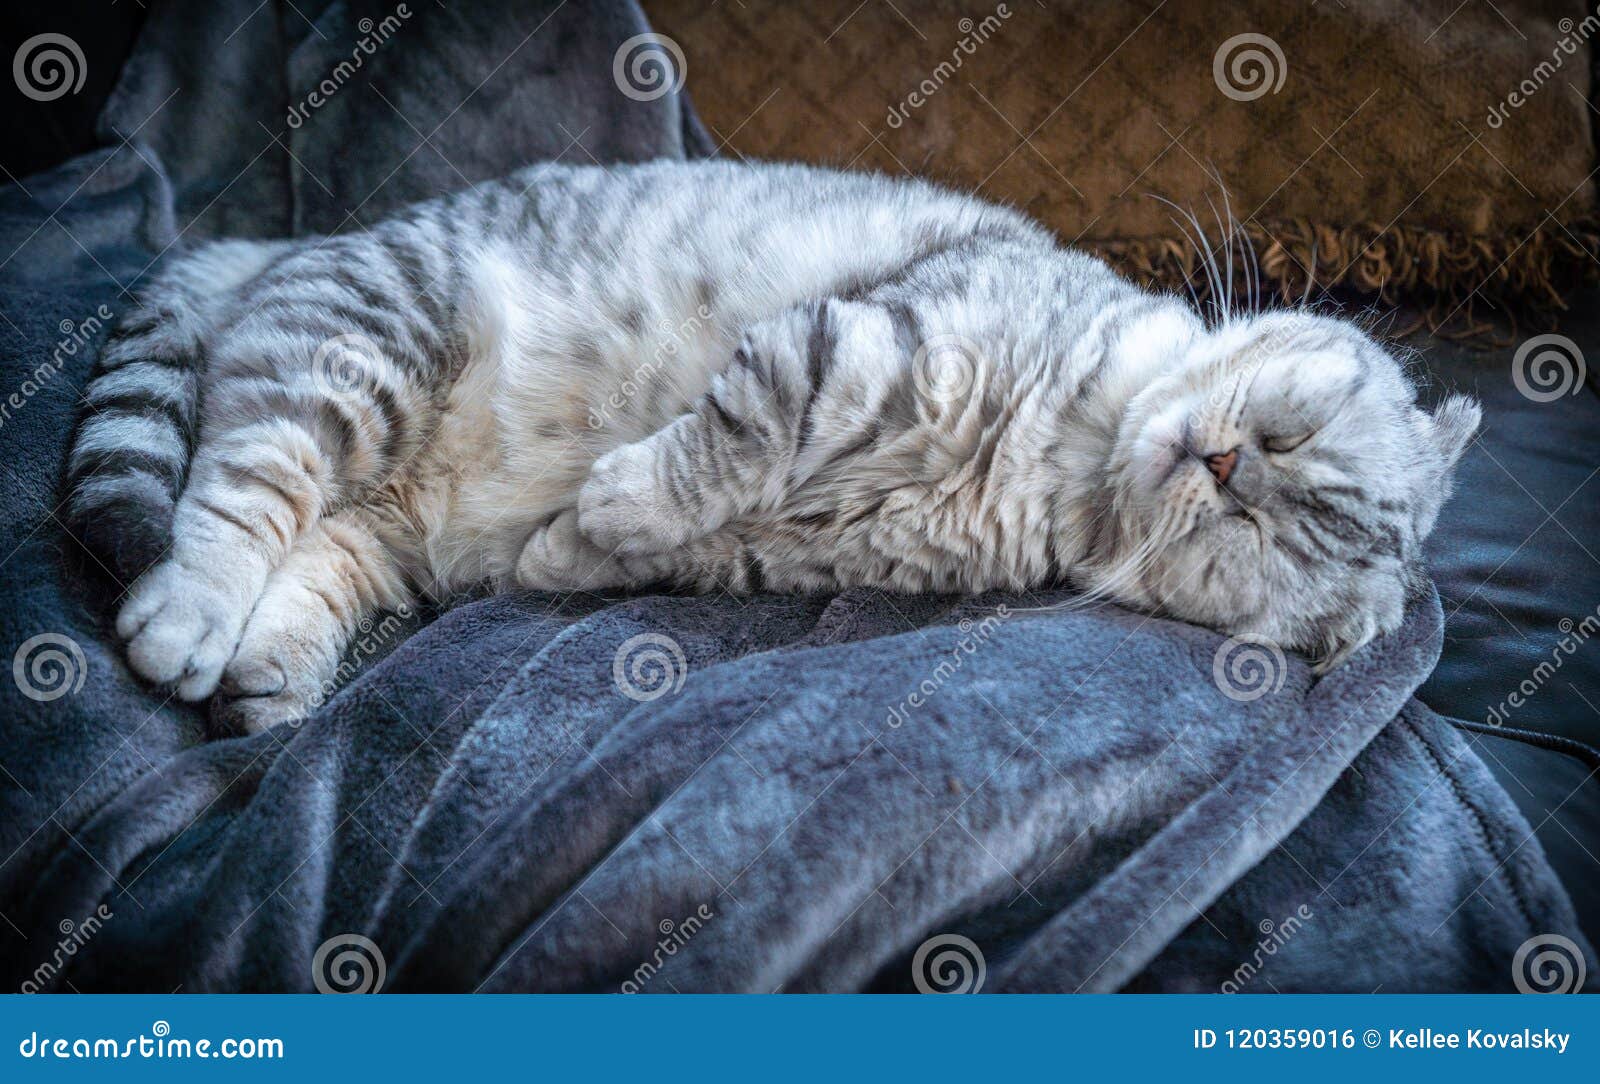 Cute White And Silver Cat Sleeping Stock Photo Image Of Scottish Relaxed 120359016